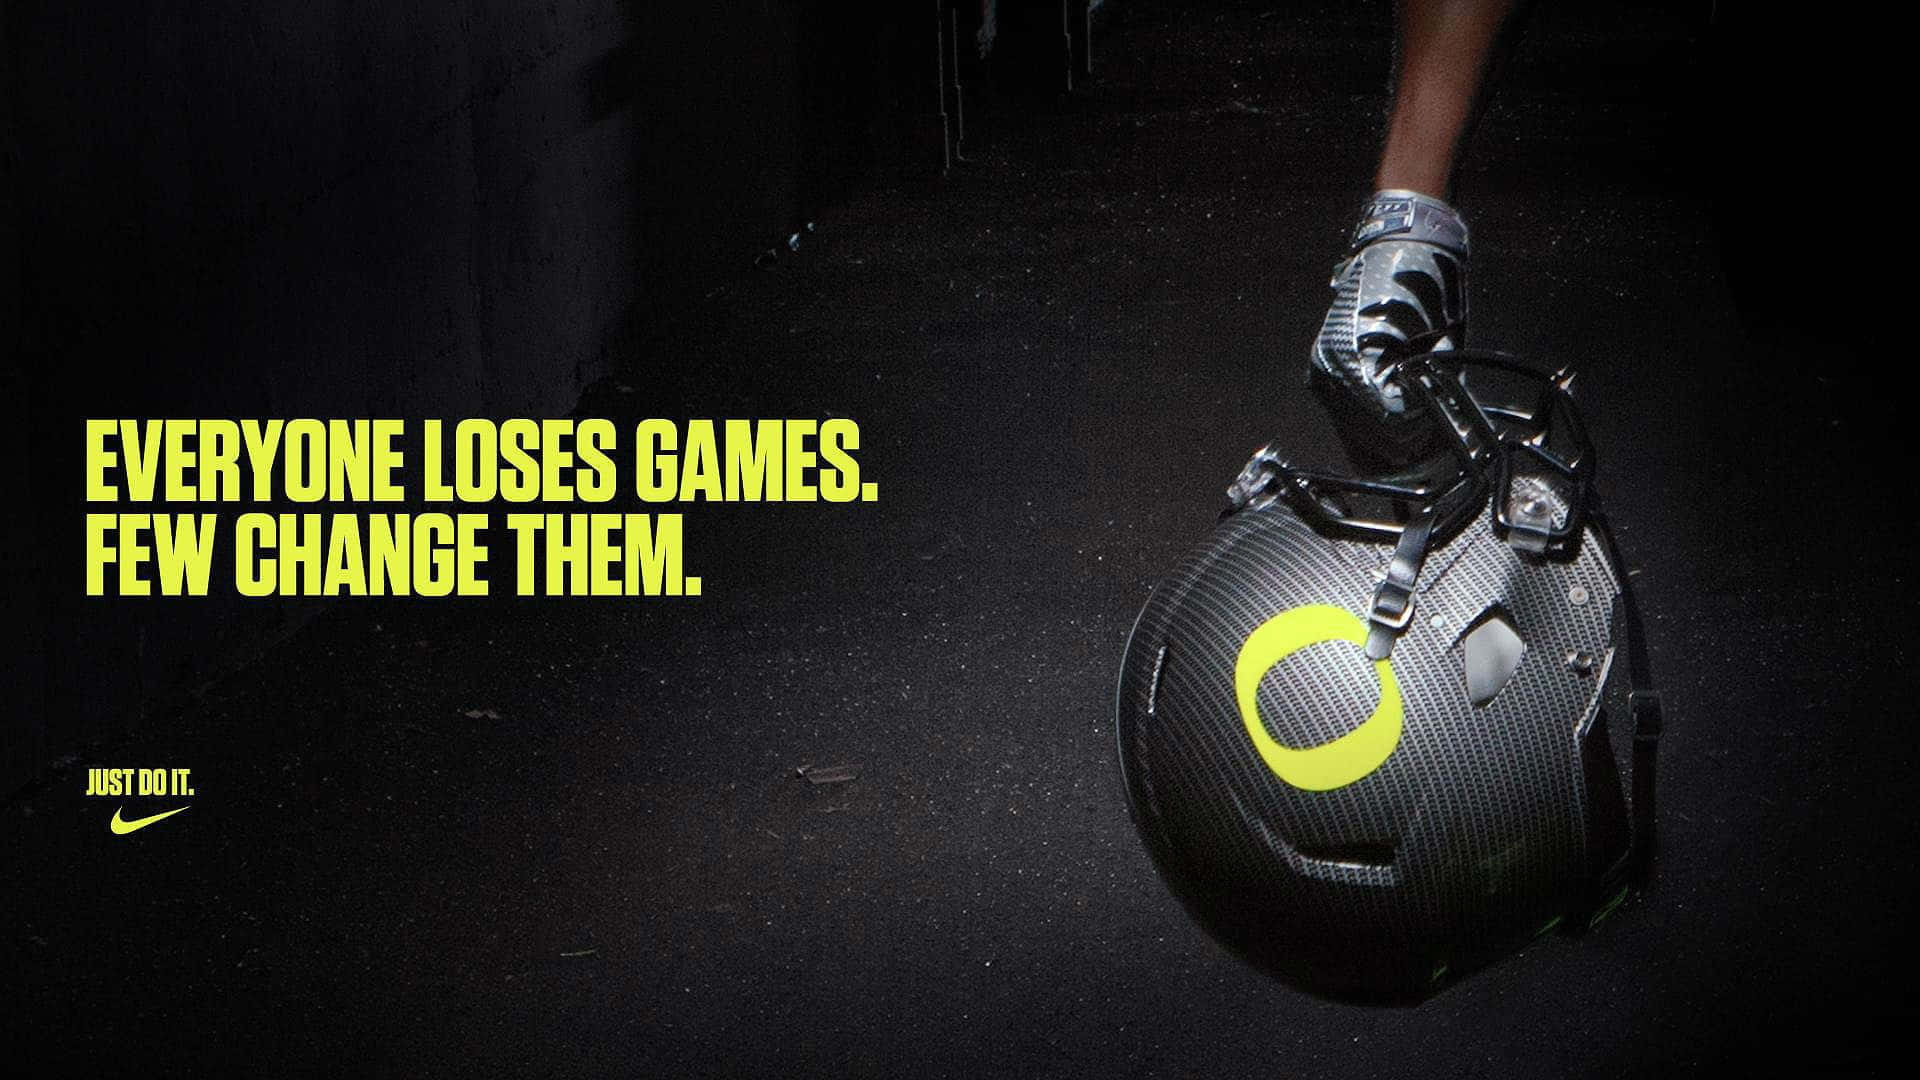 Ducks in Action: The Oregon Ducks football team in mid-play during an intense game Wallpaper